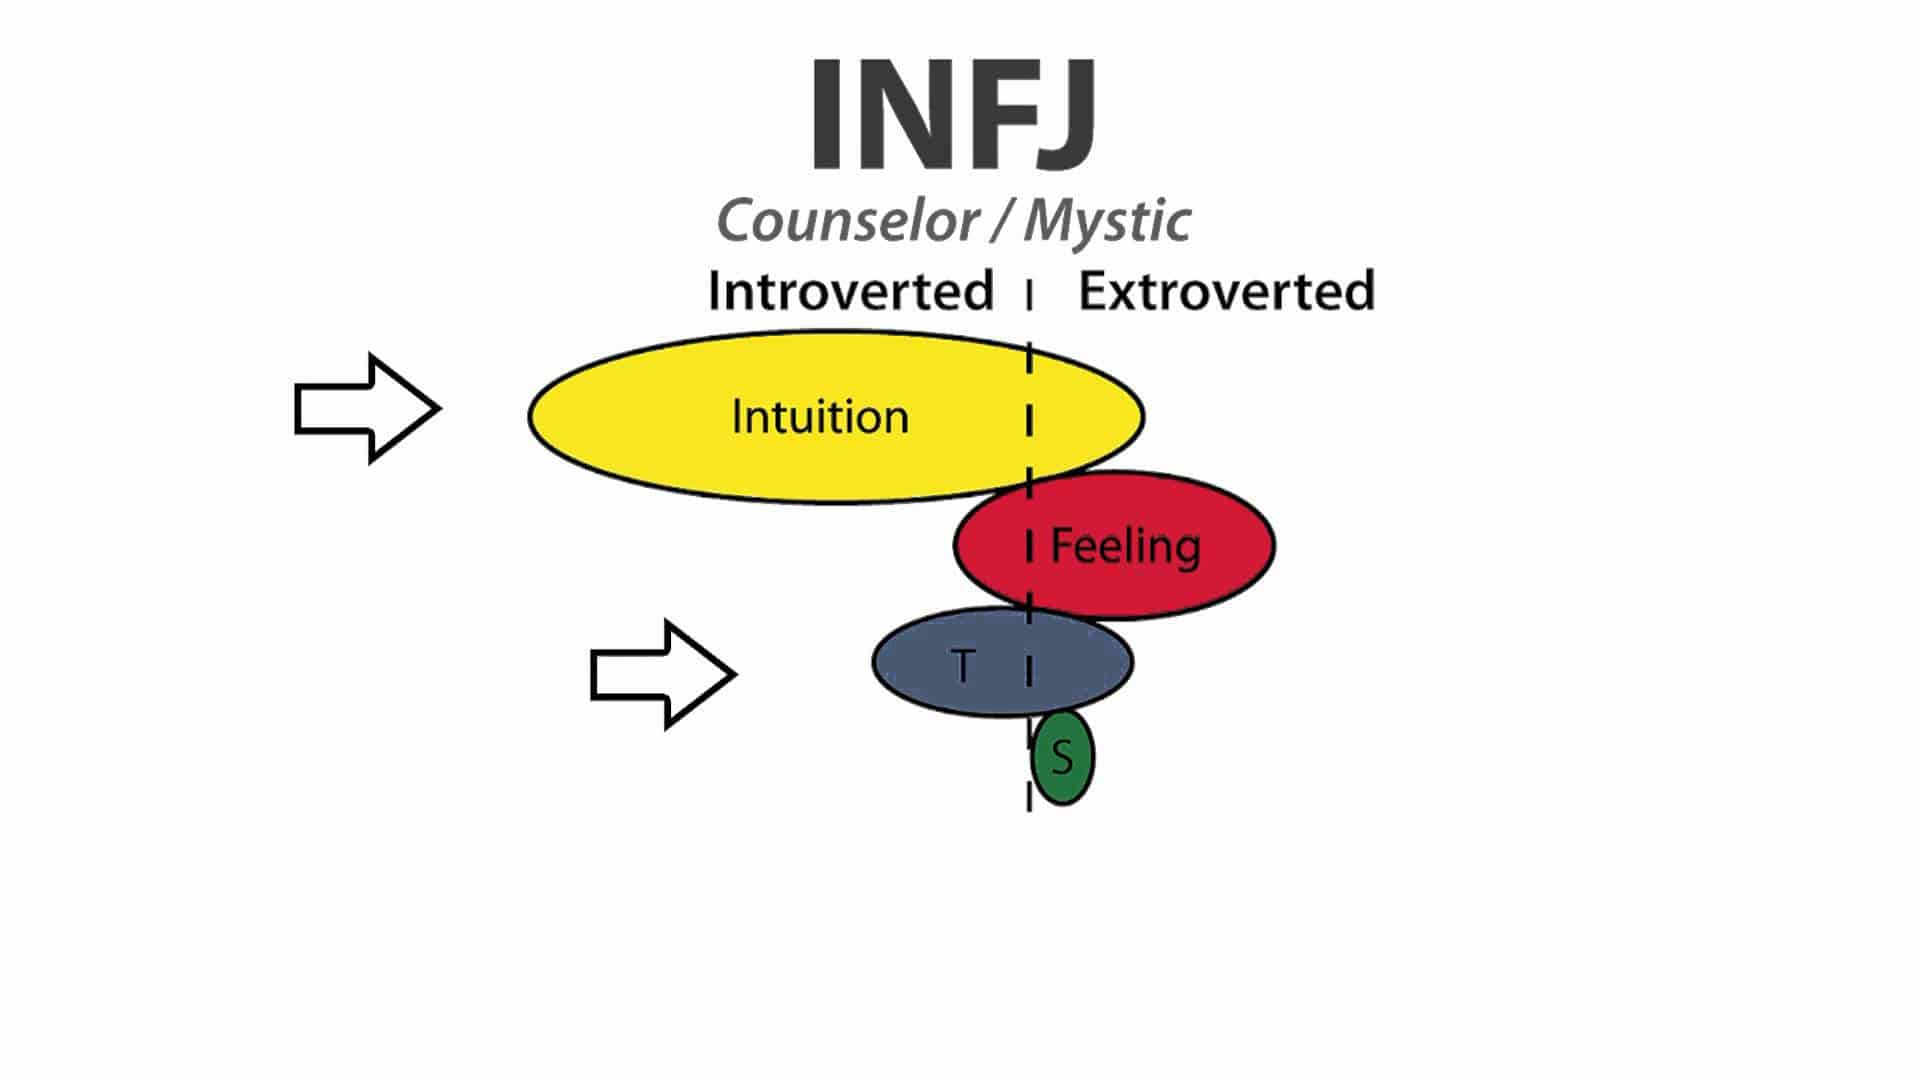 INTJ Myers Briggs personality: Meaning, Traits, and Functions